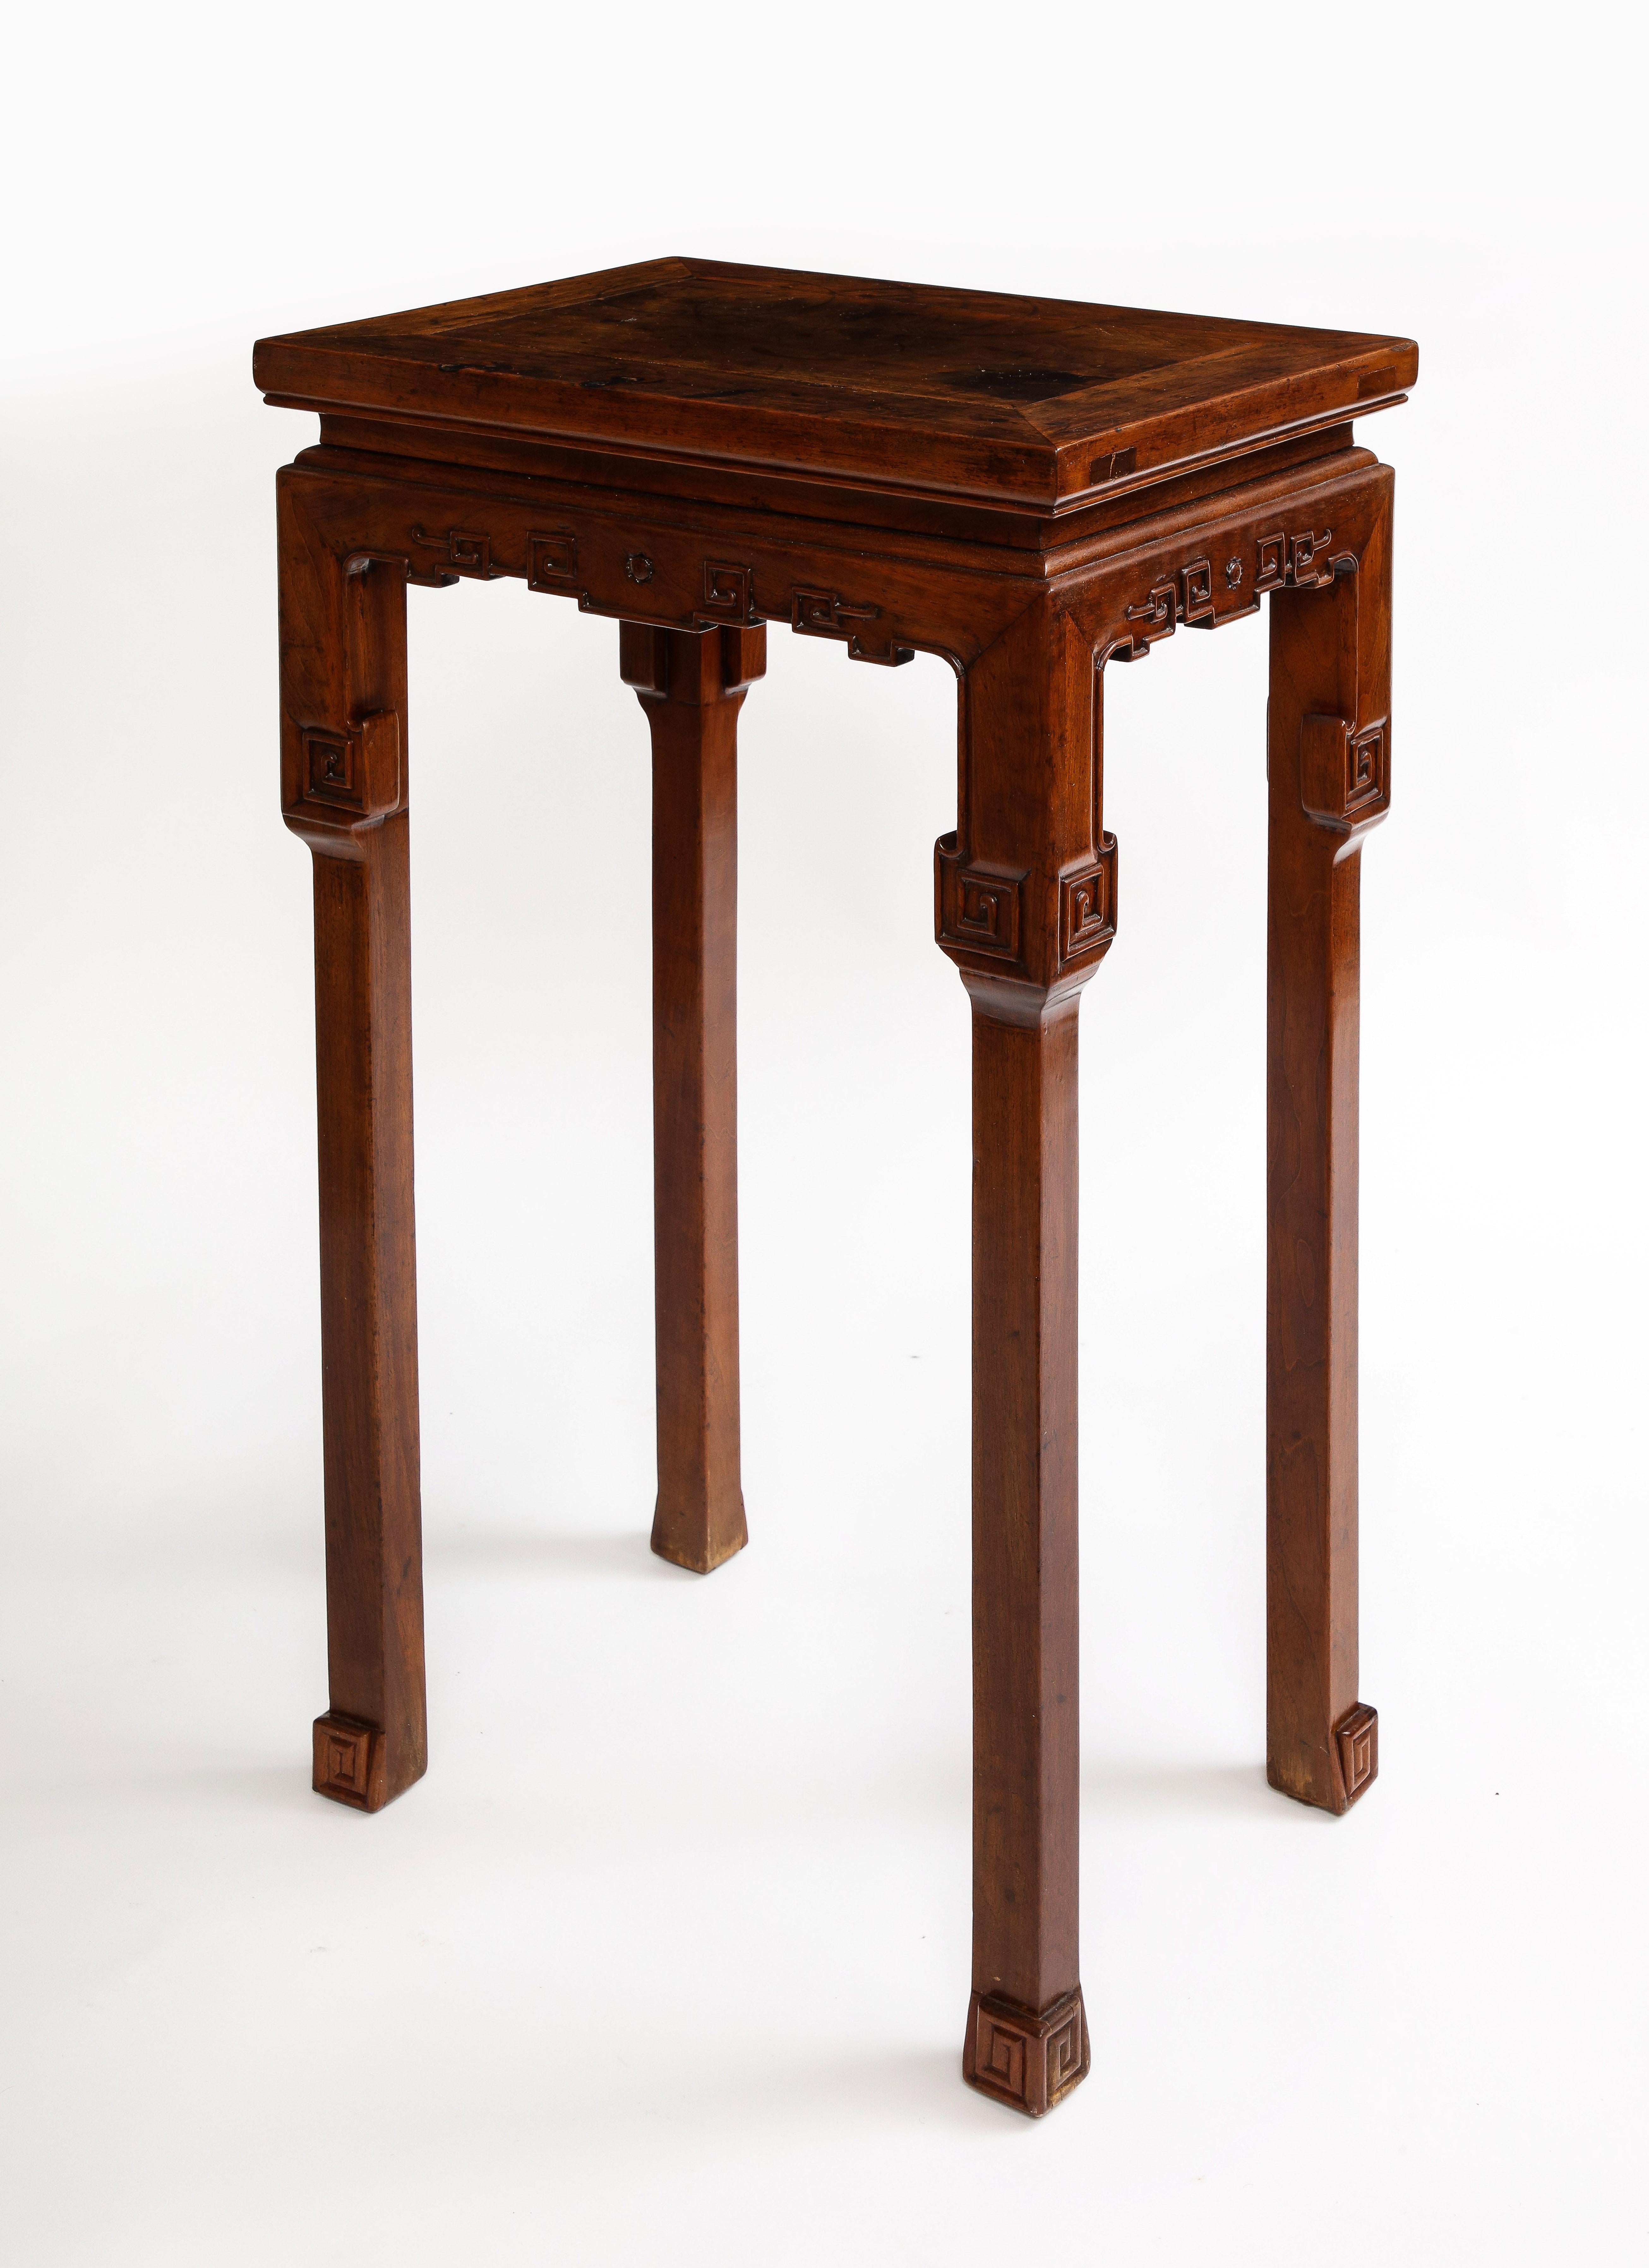 A Pair of 19th Century Qing Dynasty Chinese Carved Hardwood Pedestals For Sale 4